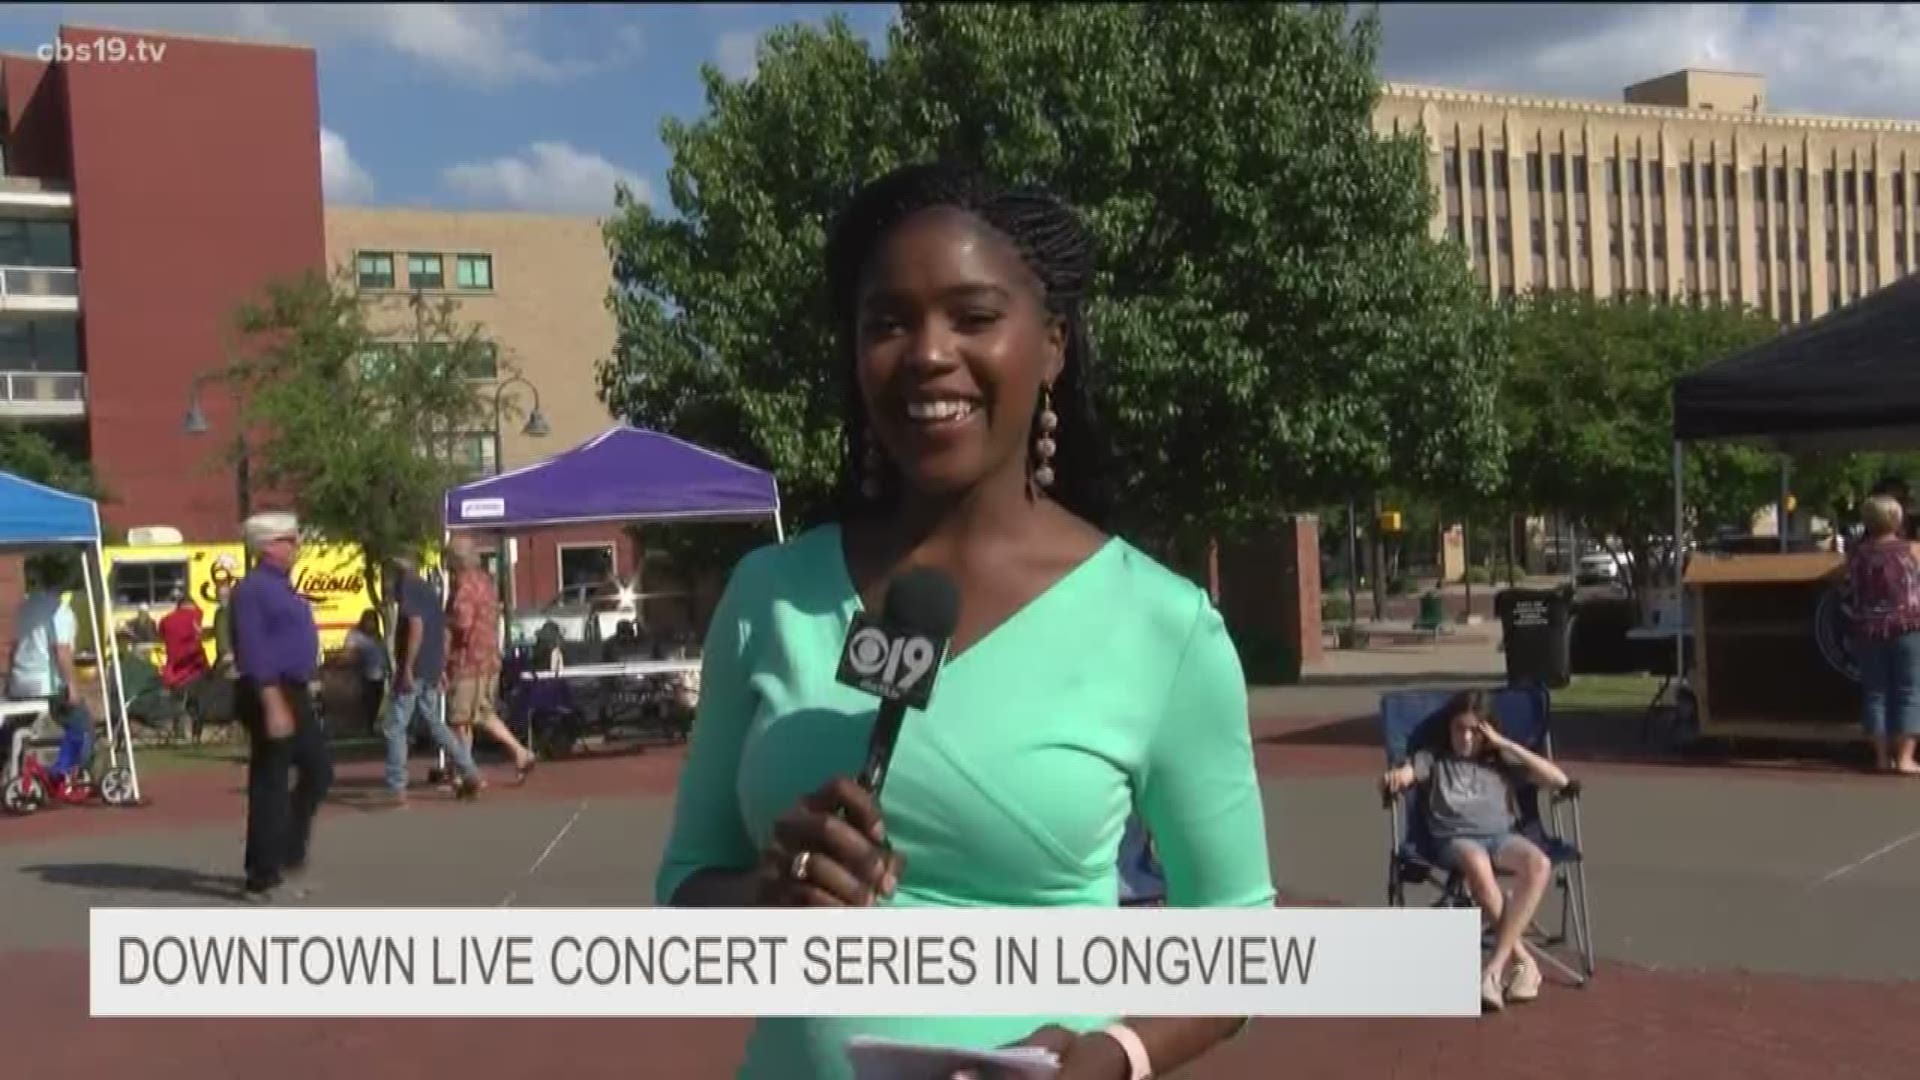 Downtown Live Concert Series in Longview